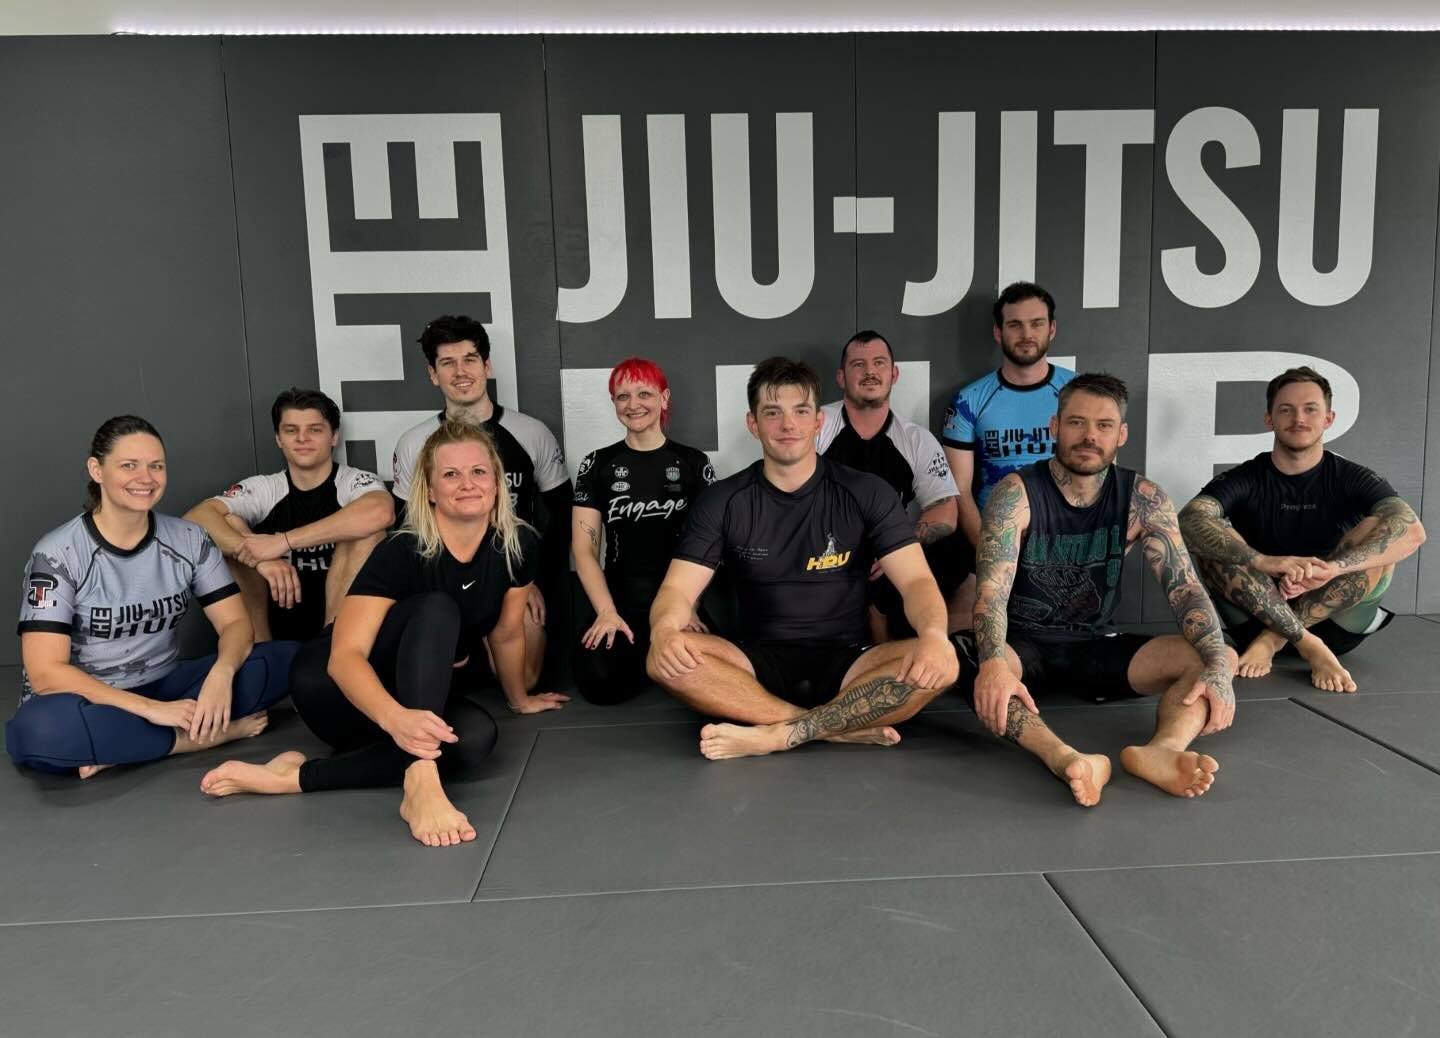 Good luck on your American 🇺🇸 adventure @cole__scott we are going to miss you in the gym and can&rsquo;t wait to see you back in August 💪🏼 

📍 20 North Shore Drive Burpengary
🌎 www.thejiujitsuhub.com.au
📞 0466 208 077

#brazilianjiujitsu #thej